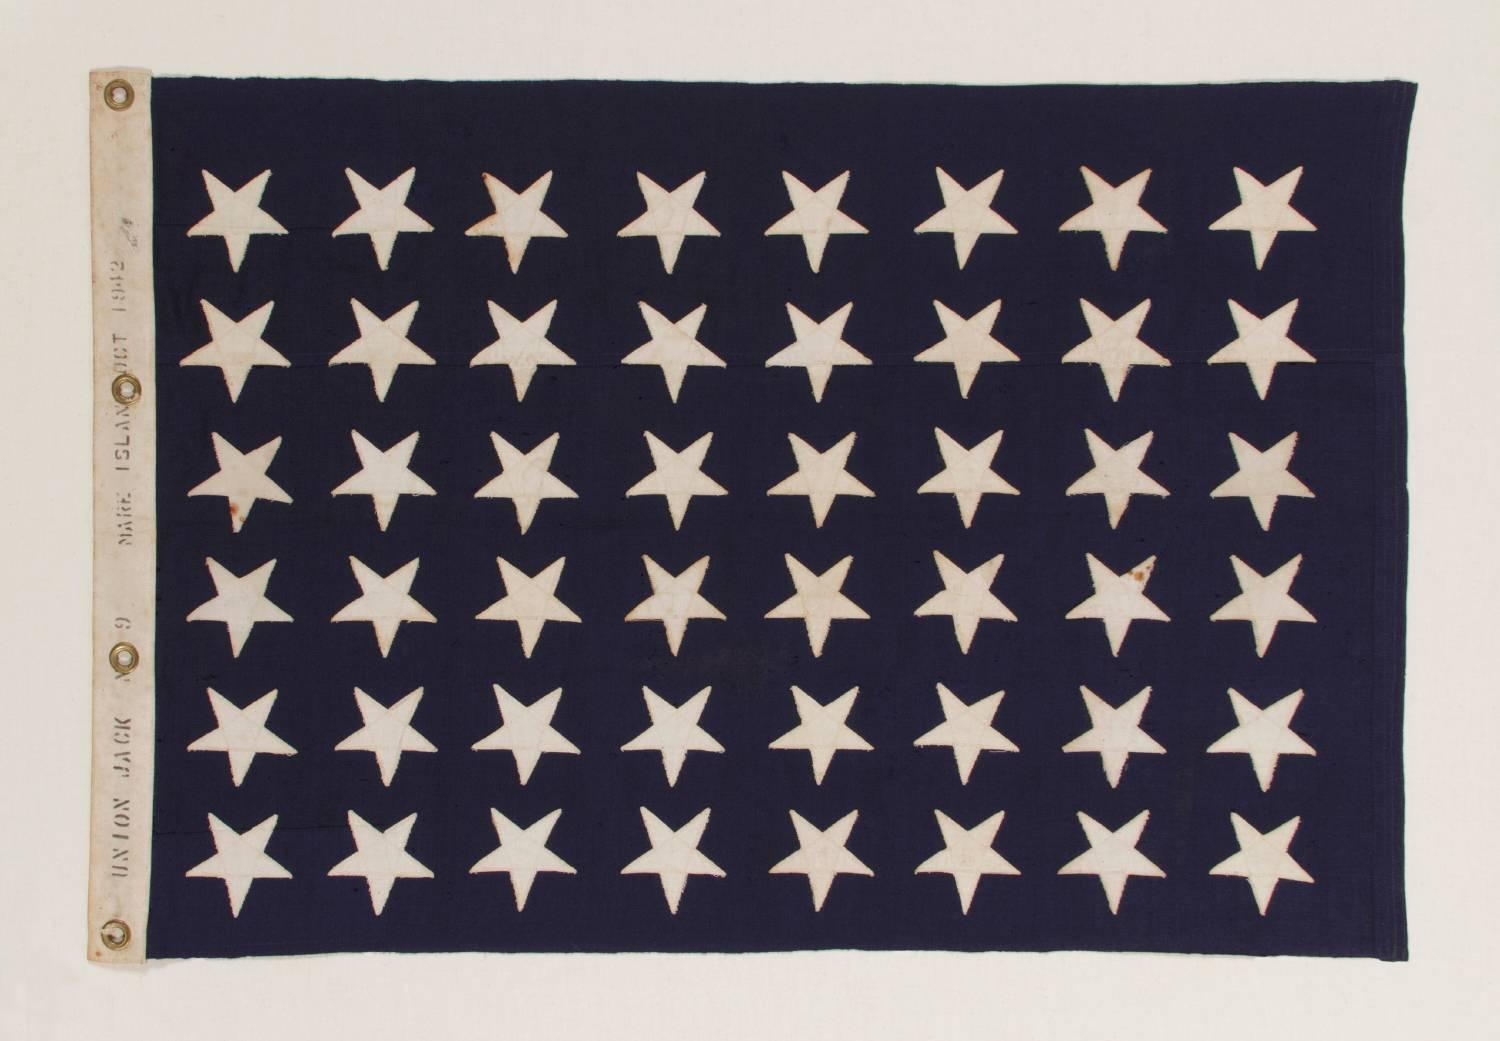 48 STAR U.S. NAVY JACK, MADE AT MARE ISLAND, CALIFORNIA, HEADQUARTERS OF THE PACIFIC FLEET, DURING WWII, DATED 1942:

United States Navy jack with 48 stars, made during WWII (U.S. involvement 1941-45) at Mare Island, California, Headquarters of the